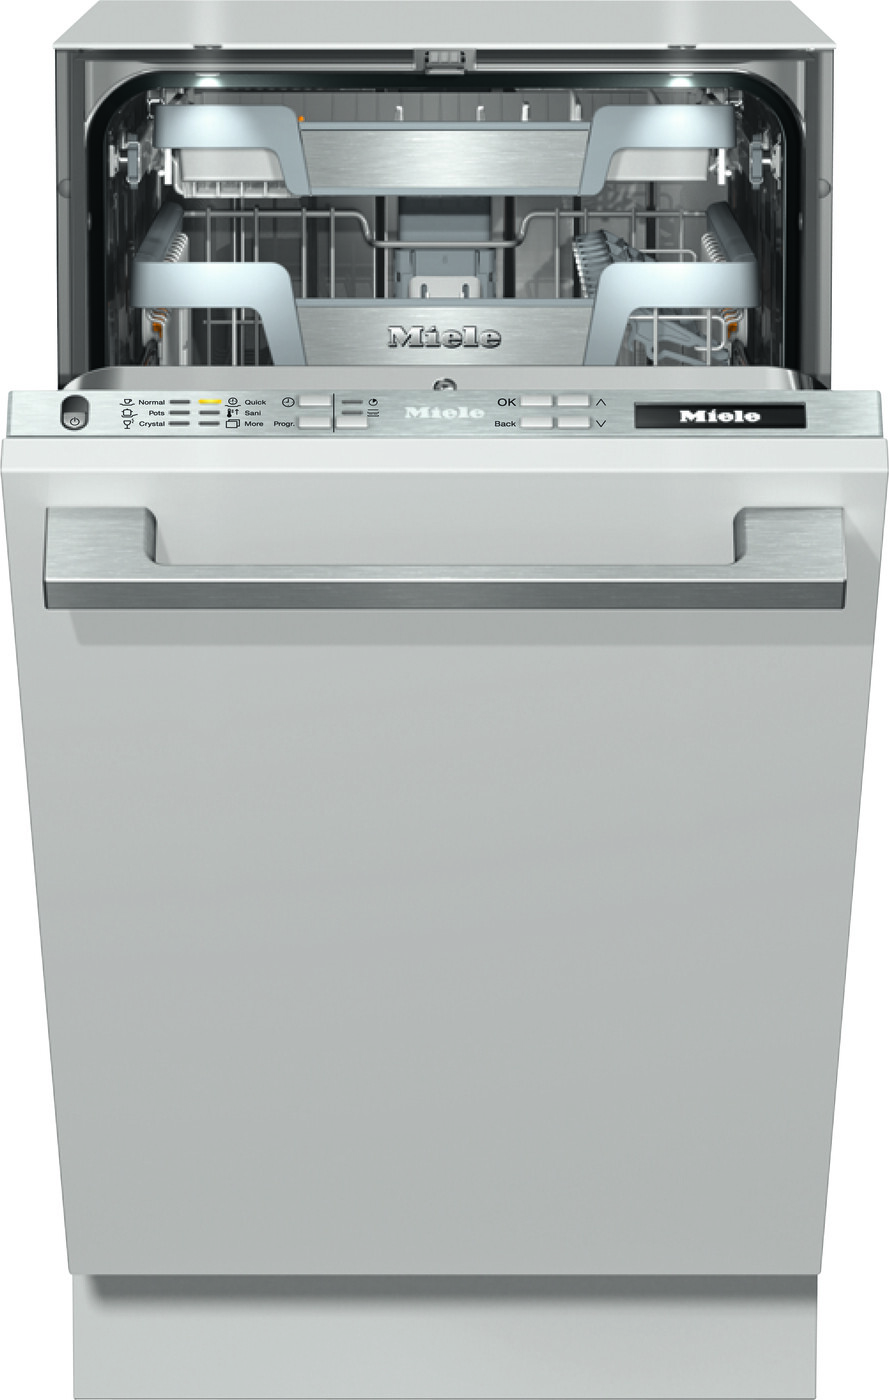 18"" Fully Integrated Built In Dishwasher - Miele G5892SCVI